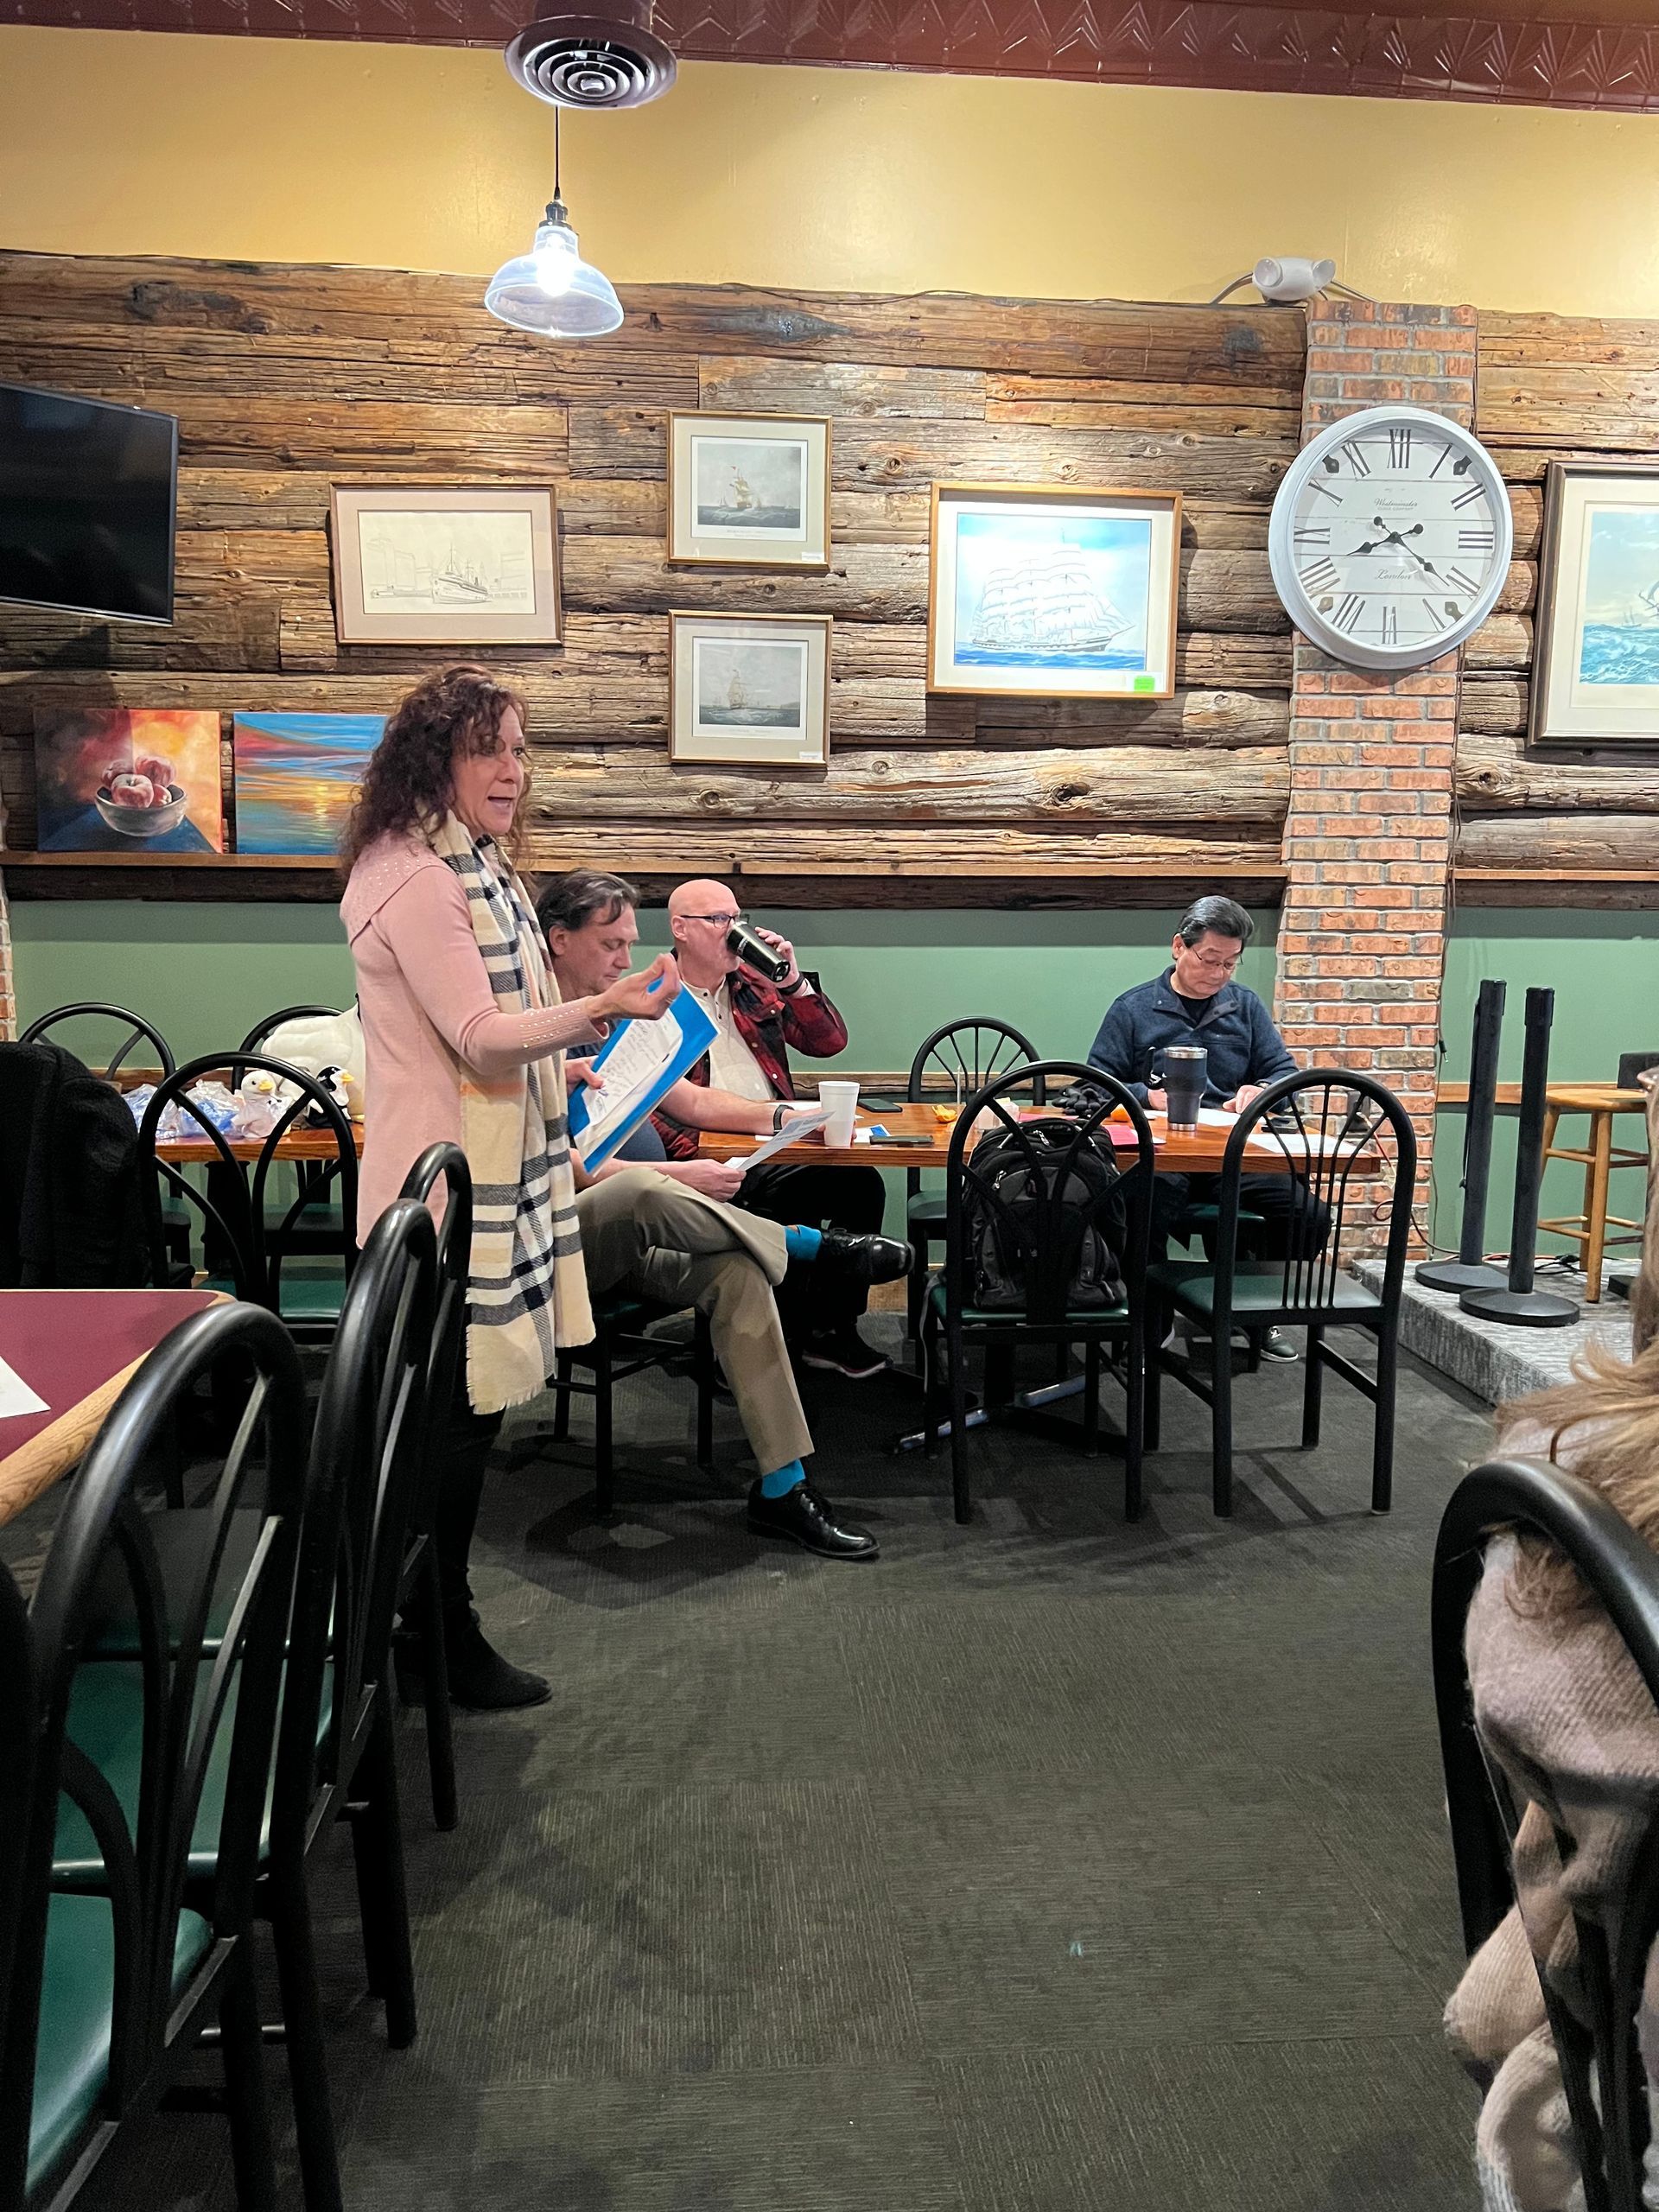 A group of people are sitting at tables in a restaurant with a clock on the wall